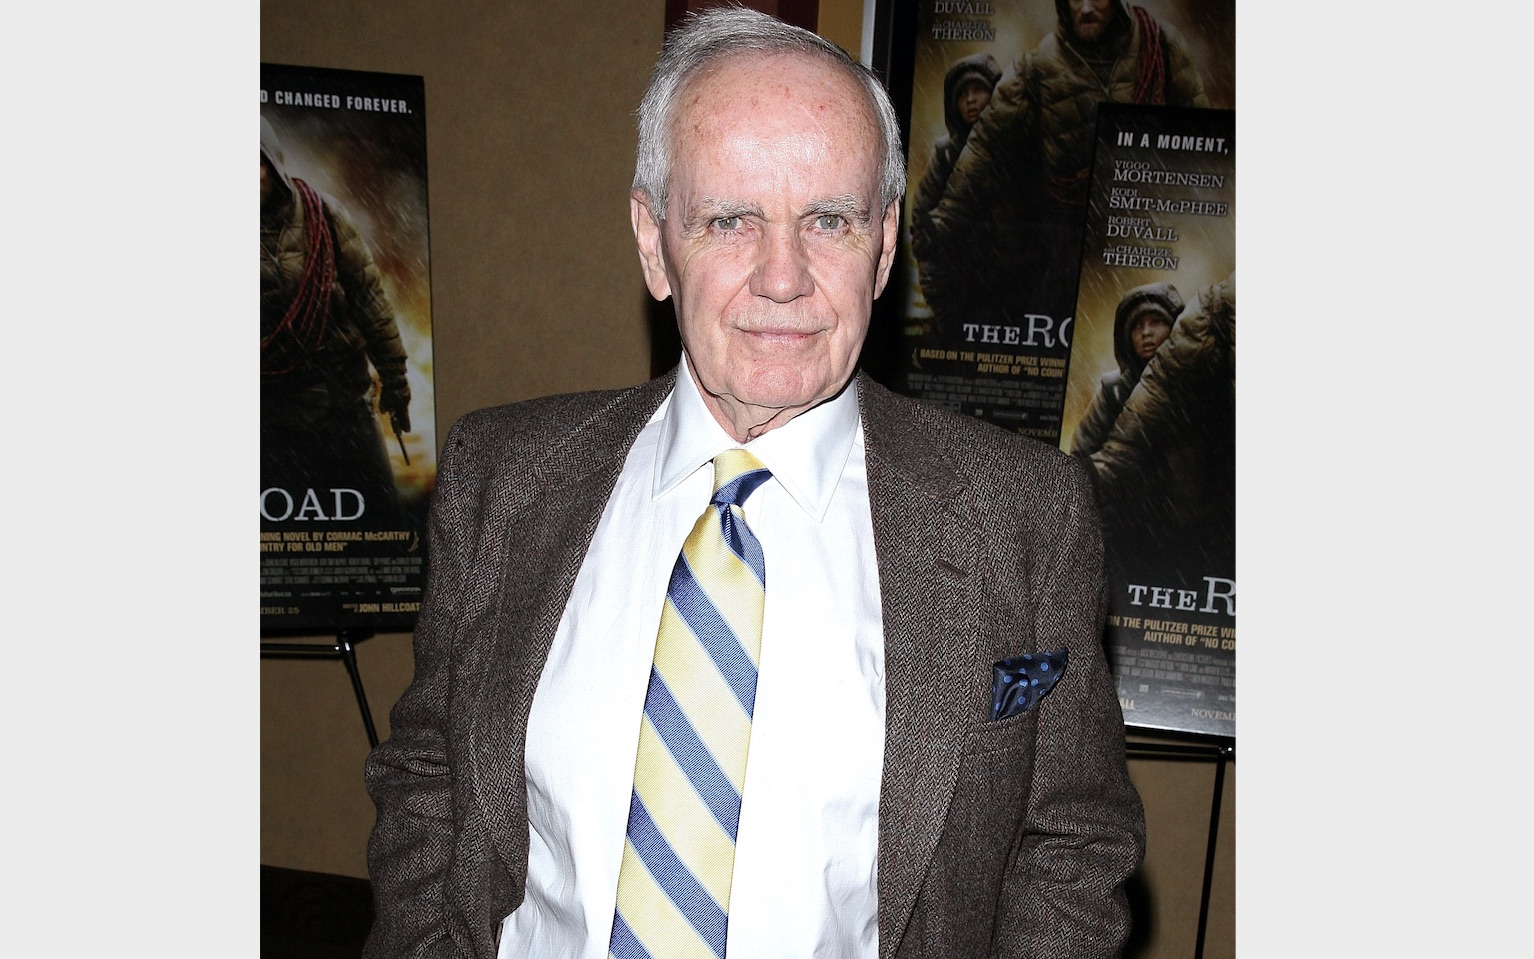 Cormac McCarthy: The Most Reclusive Novelist in America